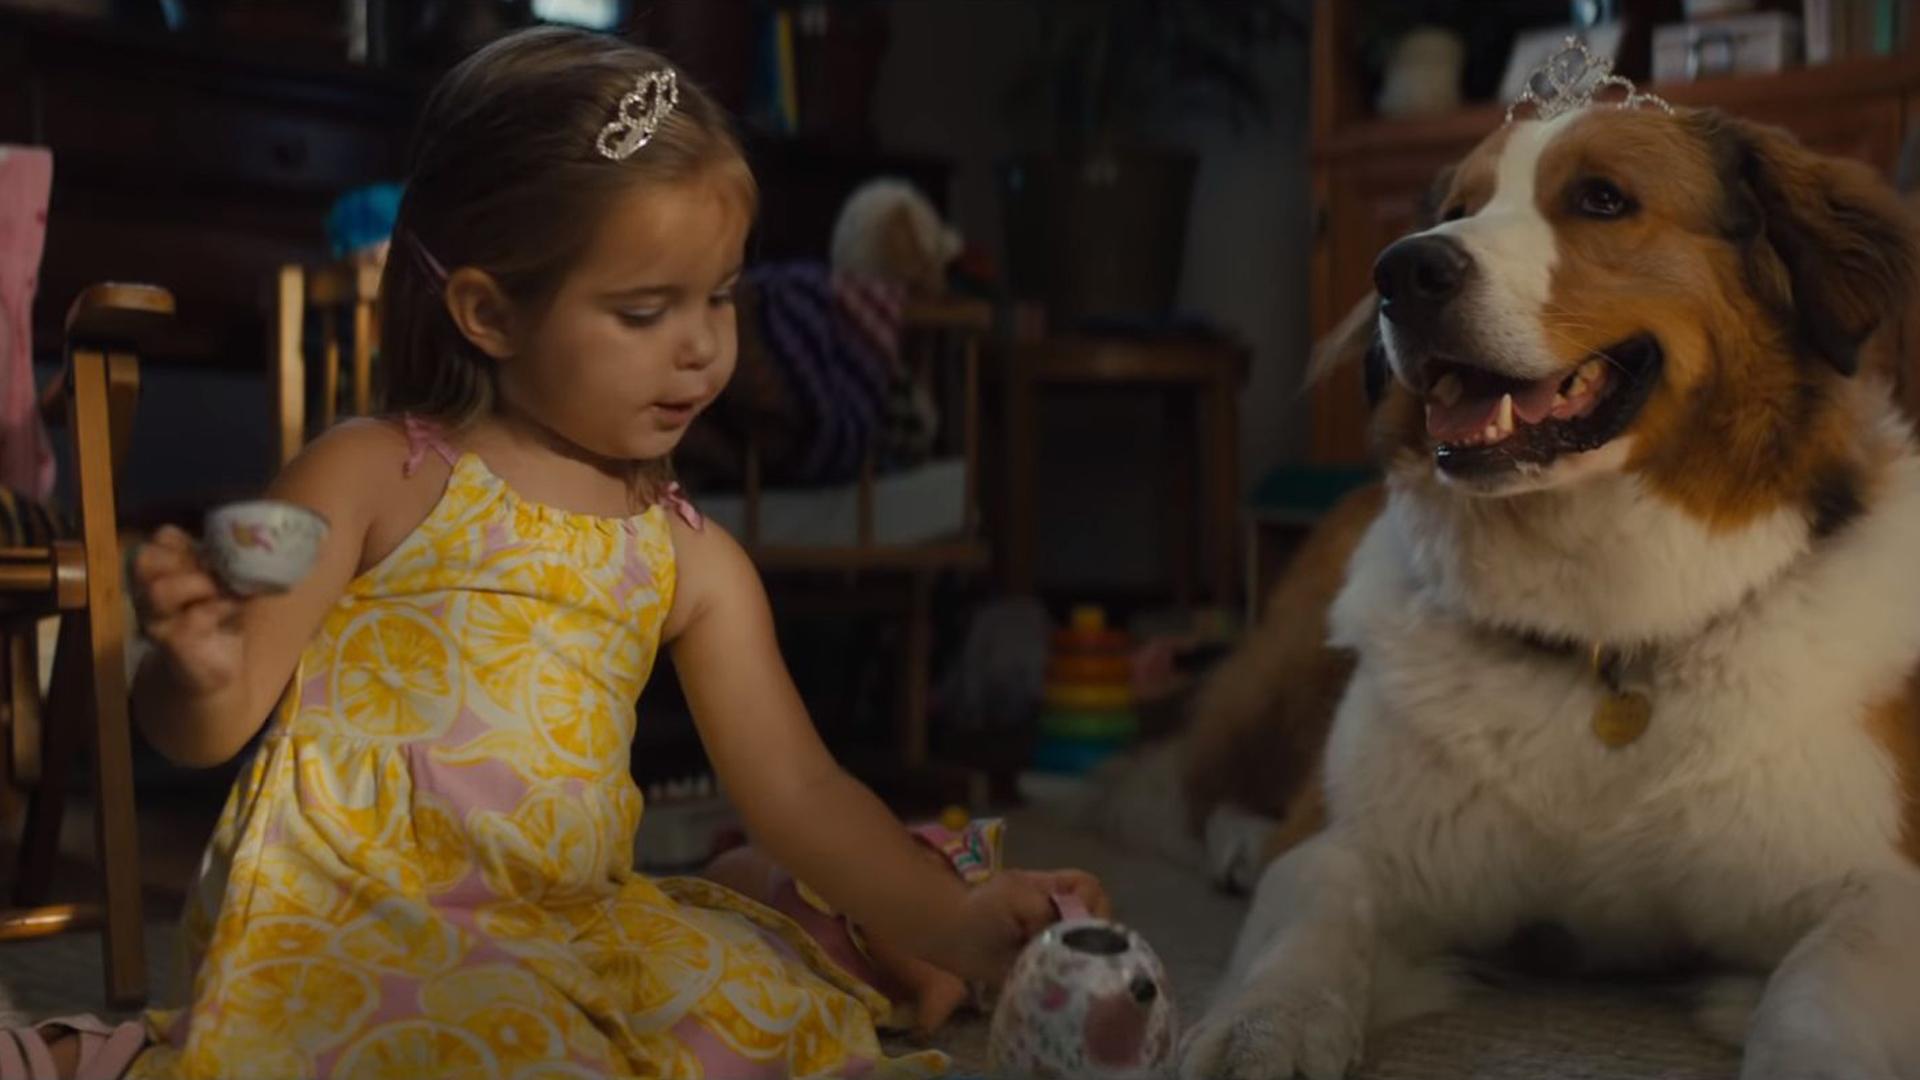 A Girl Is Bailey's New Mission In Sequel “A Dog's Journey”